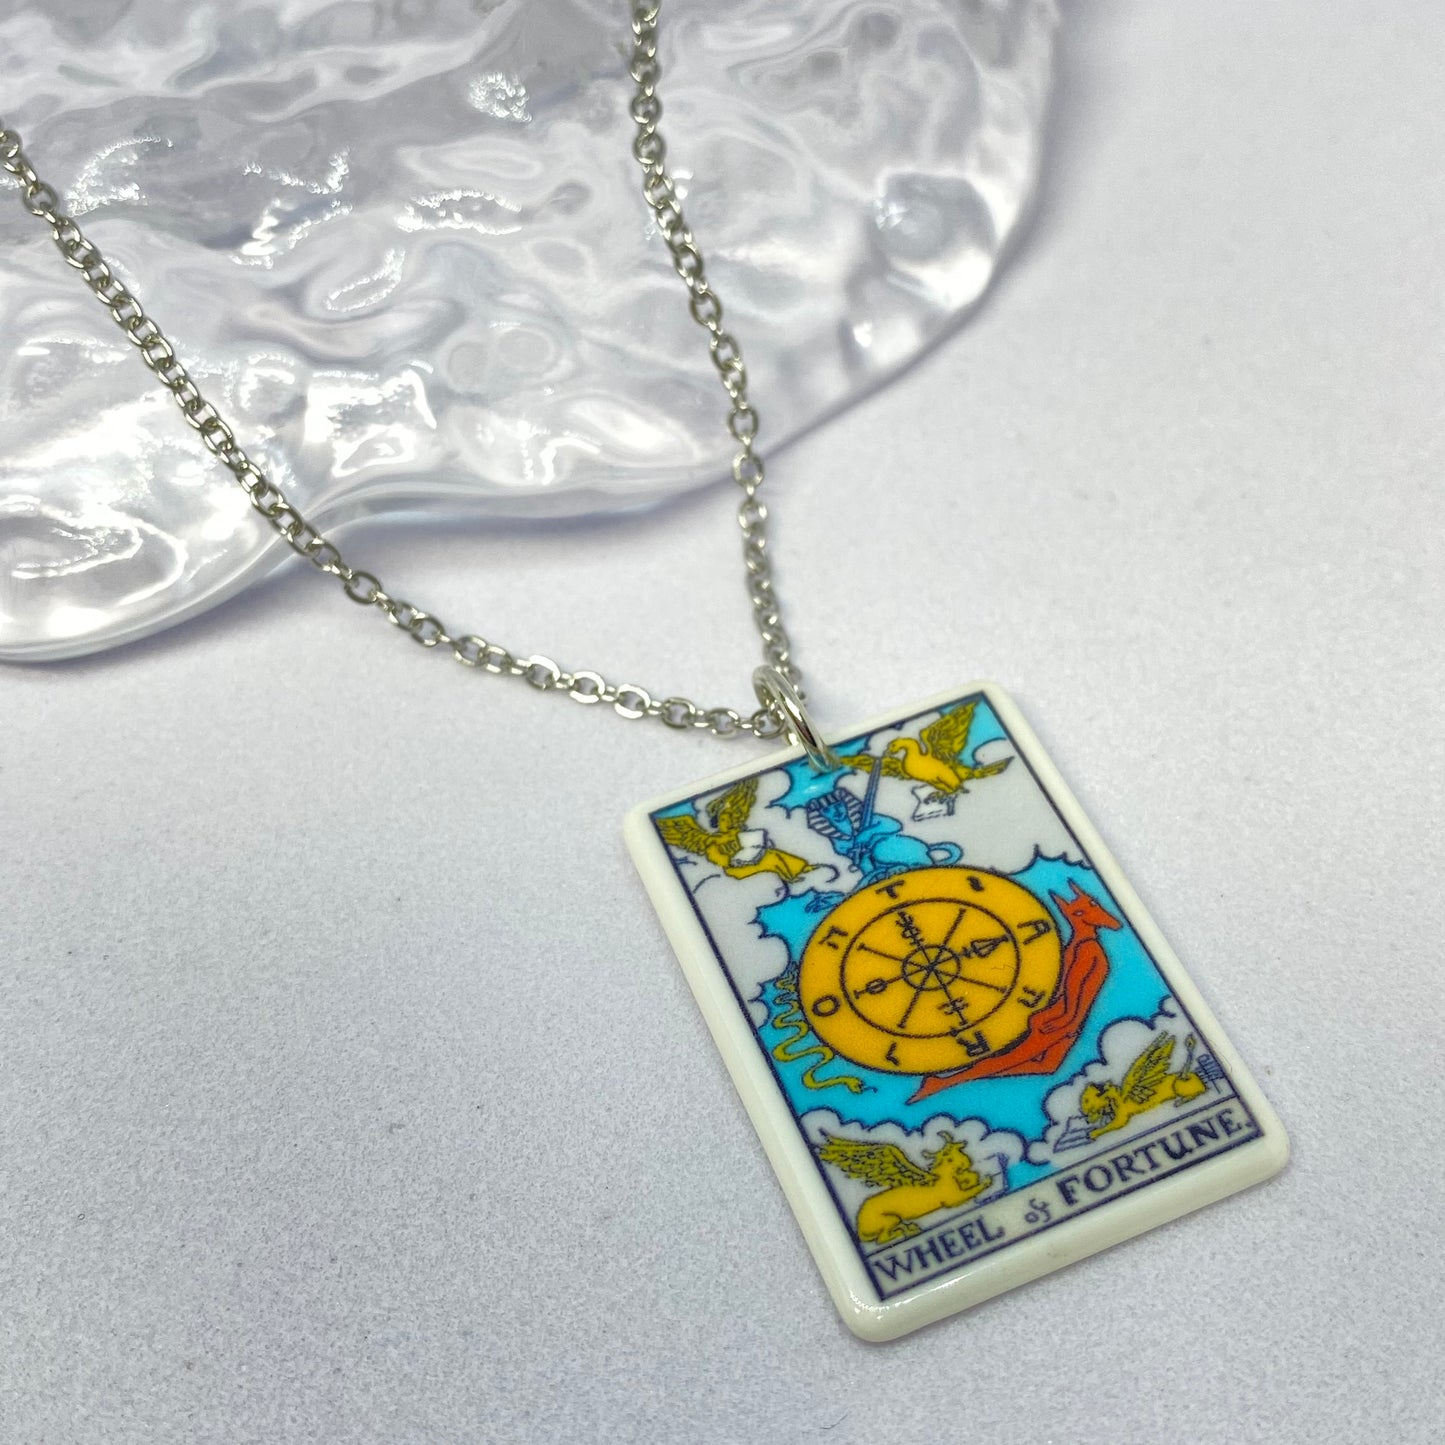 The Wheel Of Fortune Tarot Card Necklace